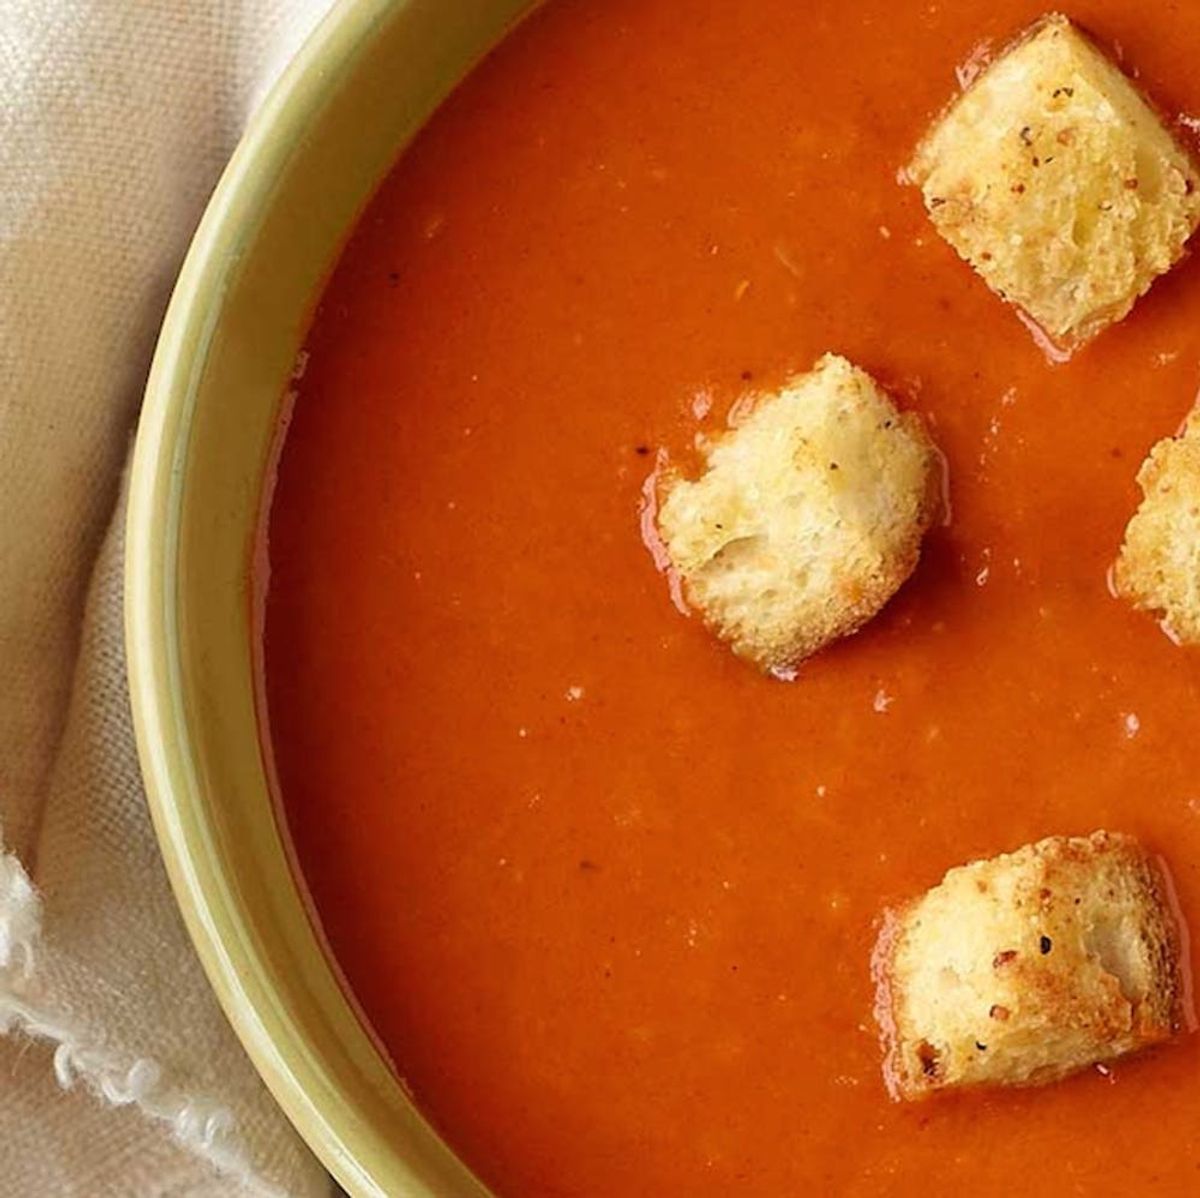 Panera Bread Is the First Restaurant Chain to Offer a “Clean” Soup Menu